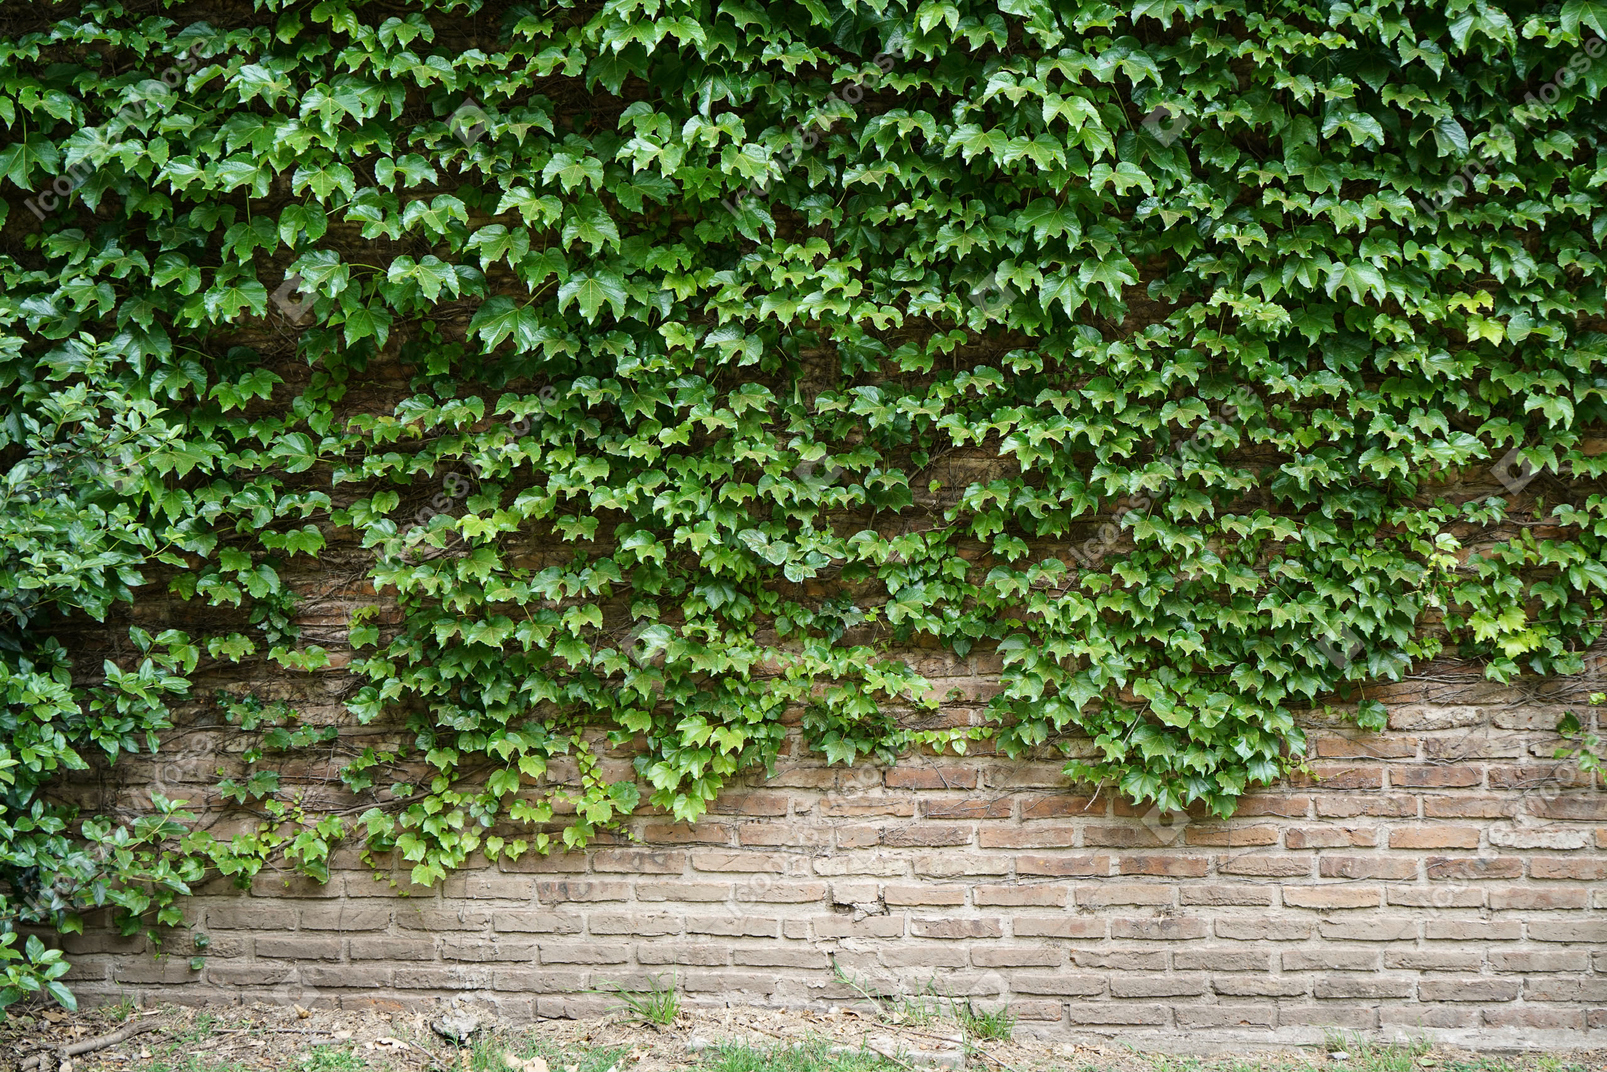 Brick wall with plants on it